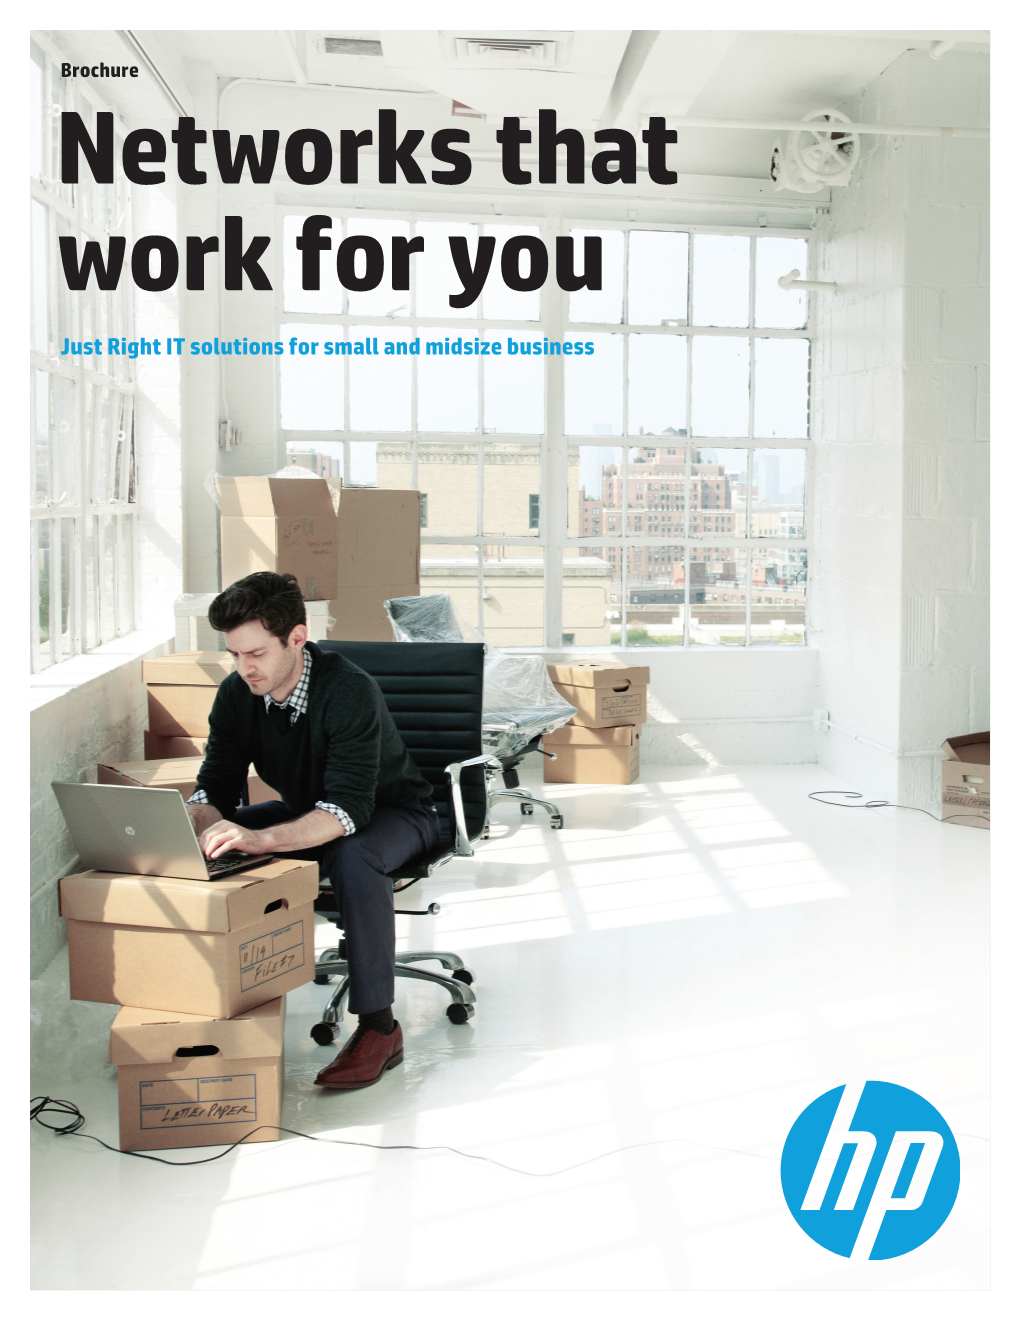 Networks Thatwork for You—Brochure